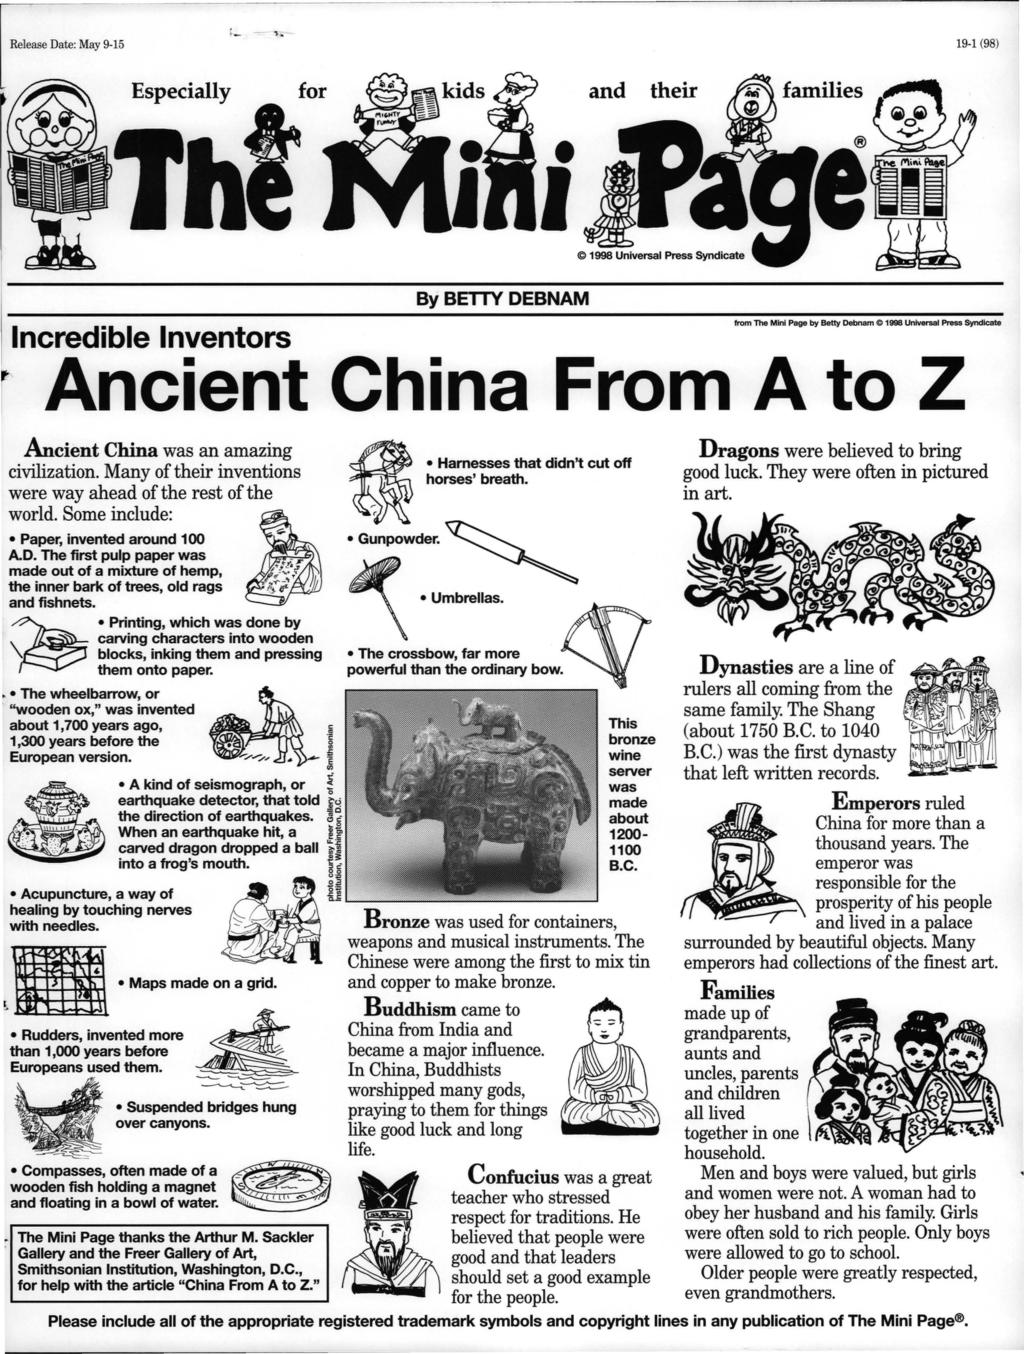 '- Especially 19-1 (98) for and their e By BETTY DEBNAM from The Mini Page by Betty Debnam e 1998 Universal Press Syndicate ncredible nventors Ancient China From A to Z.